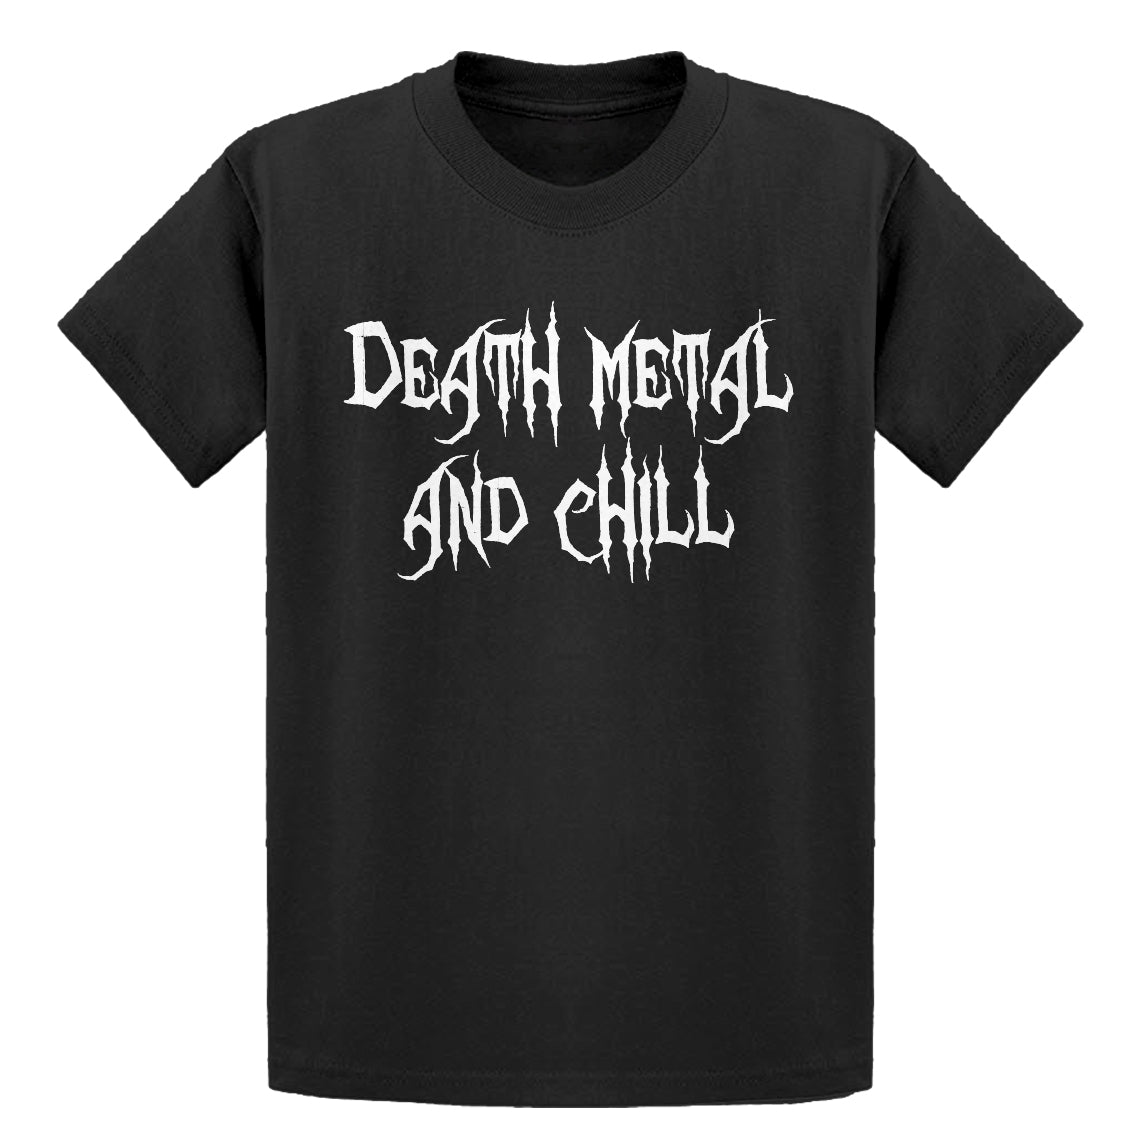 Youth Death Metal and Chill Kids T-shirt